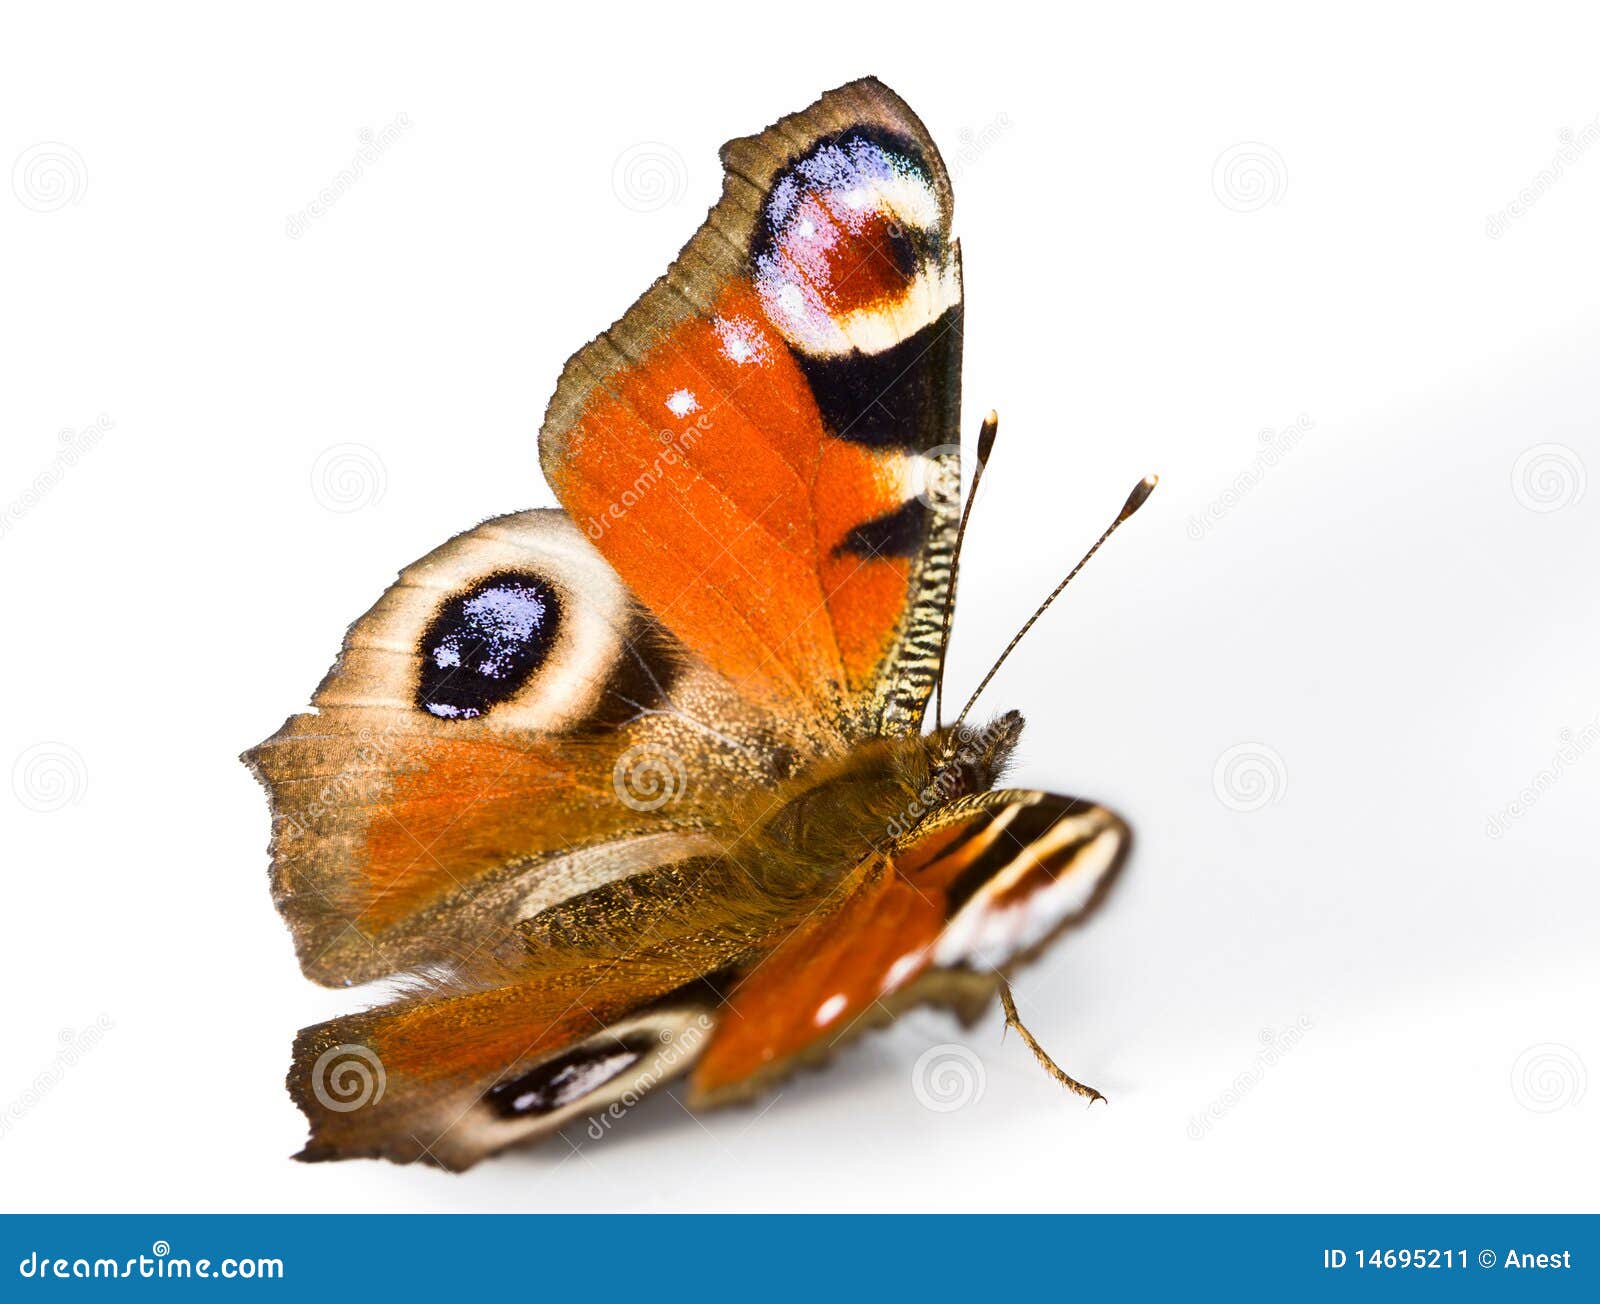 Spread Wings Of Peacock Butterfly Stock Image - Image of butterfly ...